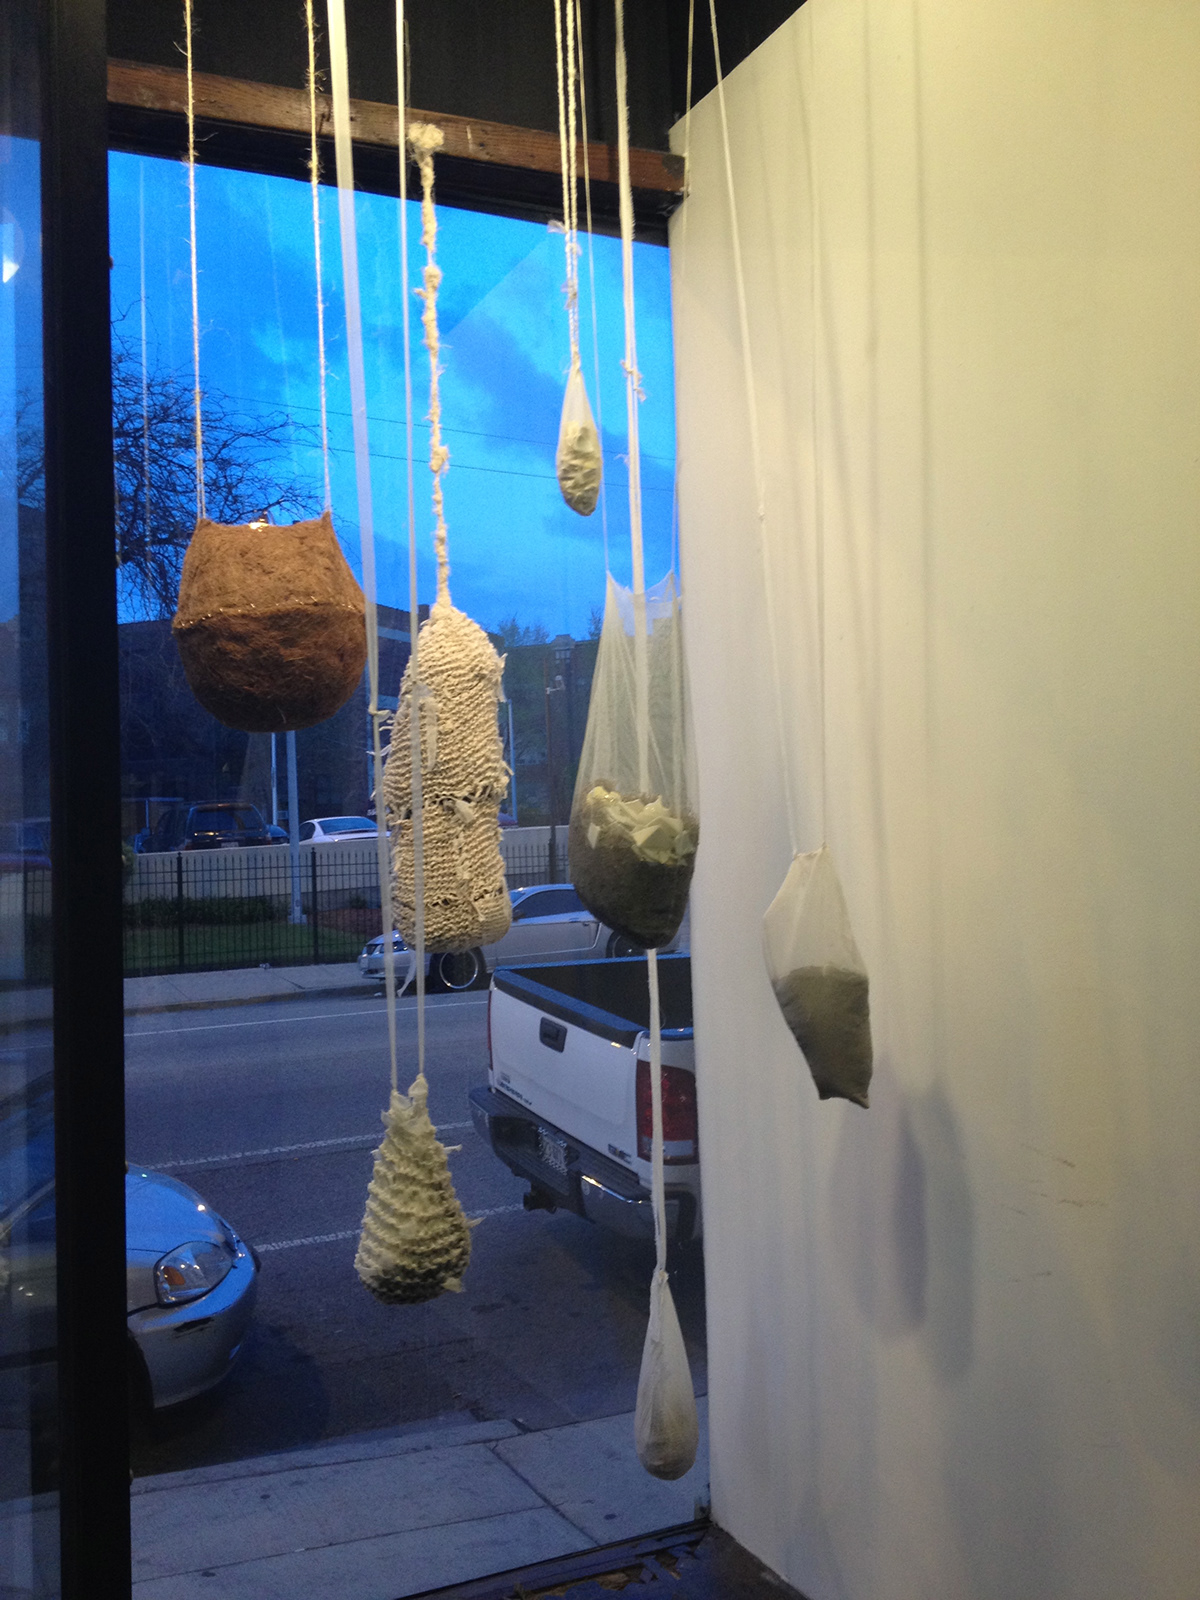 Cocoon nest knit dirt sculpture soil broke fixed mixed media hanging installation transforming tranquil